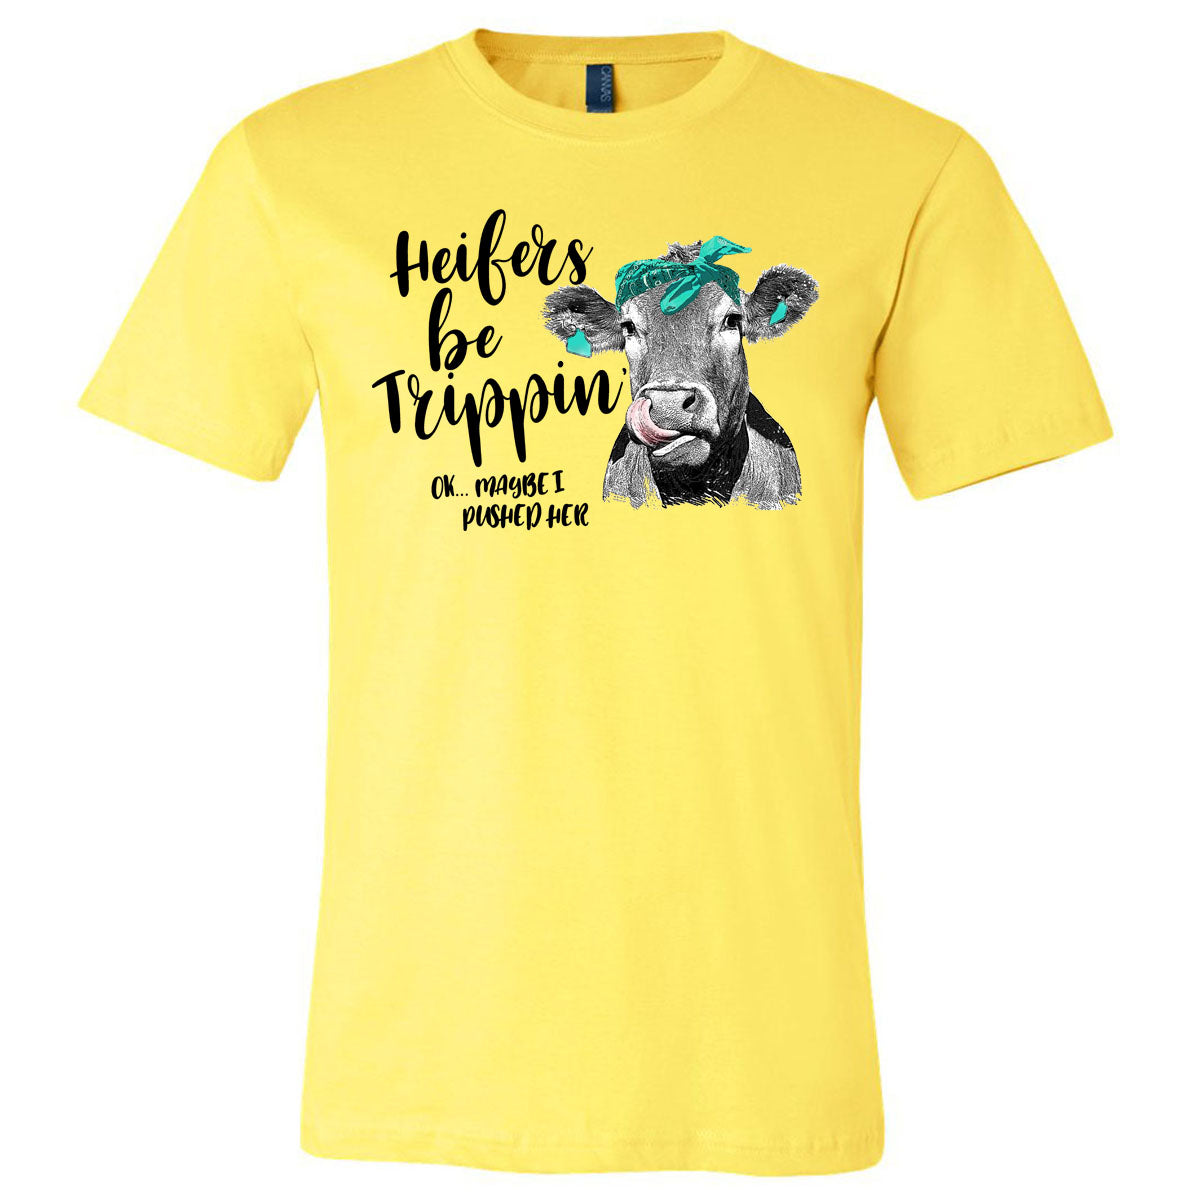 Heifers Be Trippin...Ok Maybe I Pushed Her - Yellow Short-Sleeve Tee - Southern Grace Creations